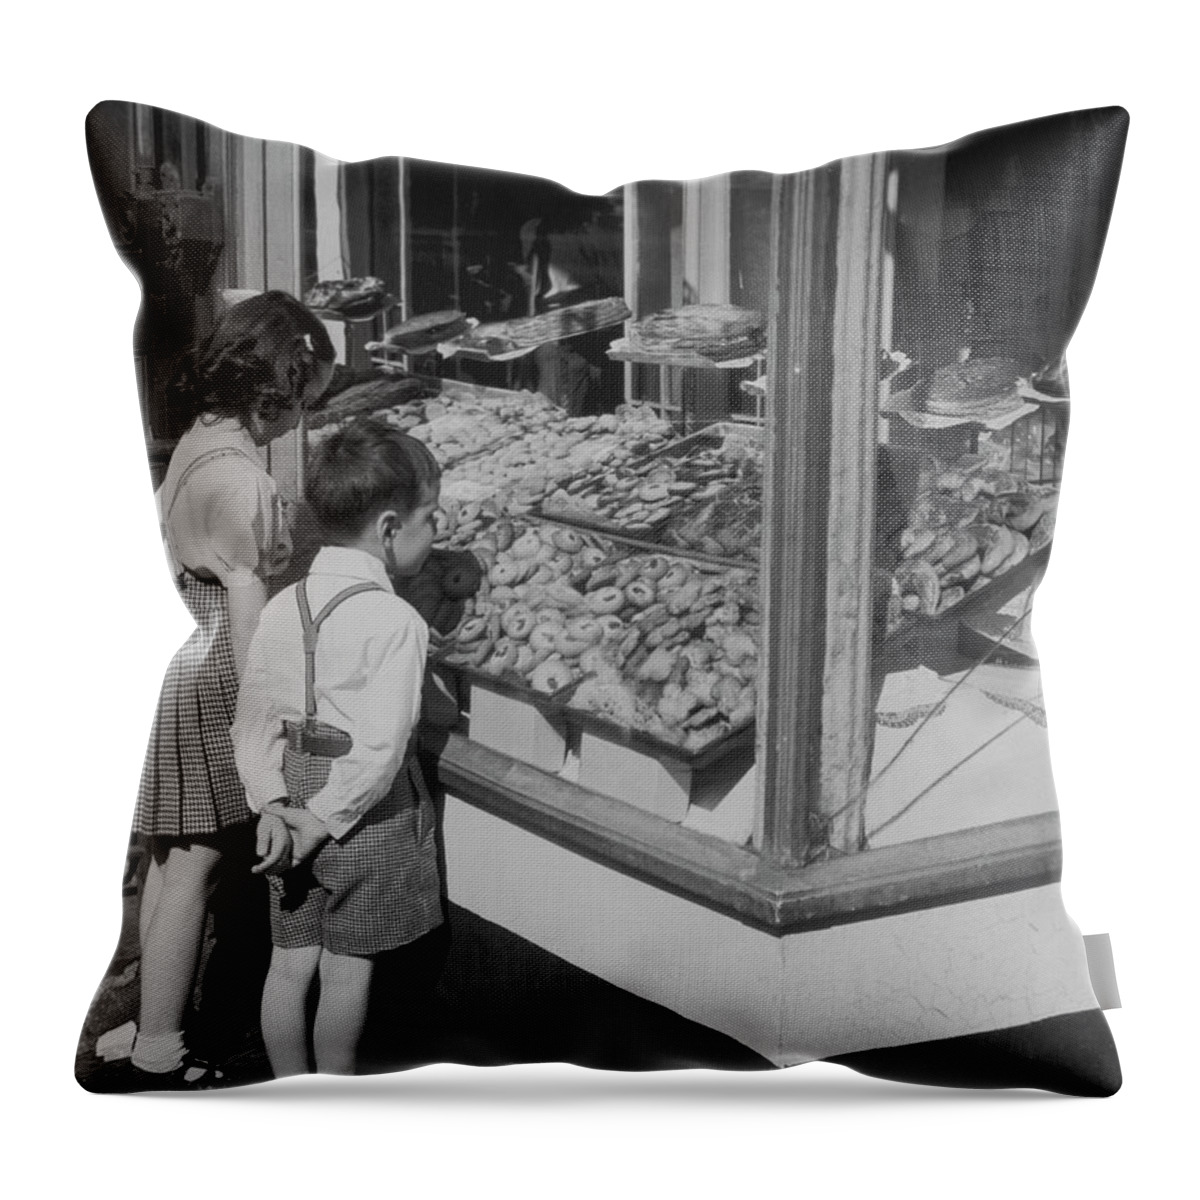 Child Throw Pillow featuring the photograph Boy And Girl Looking In At Bakery by Fpg